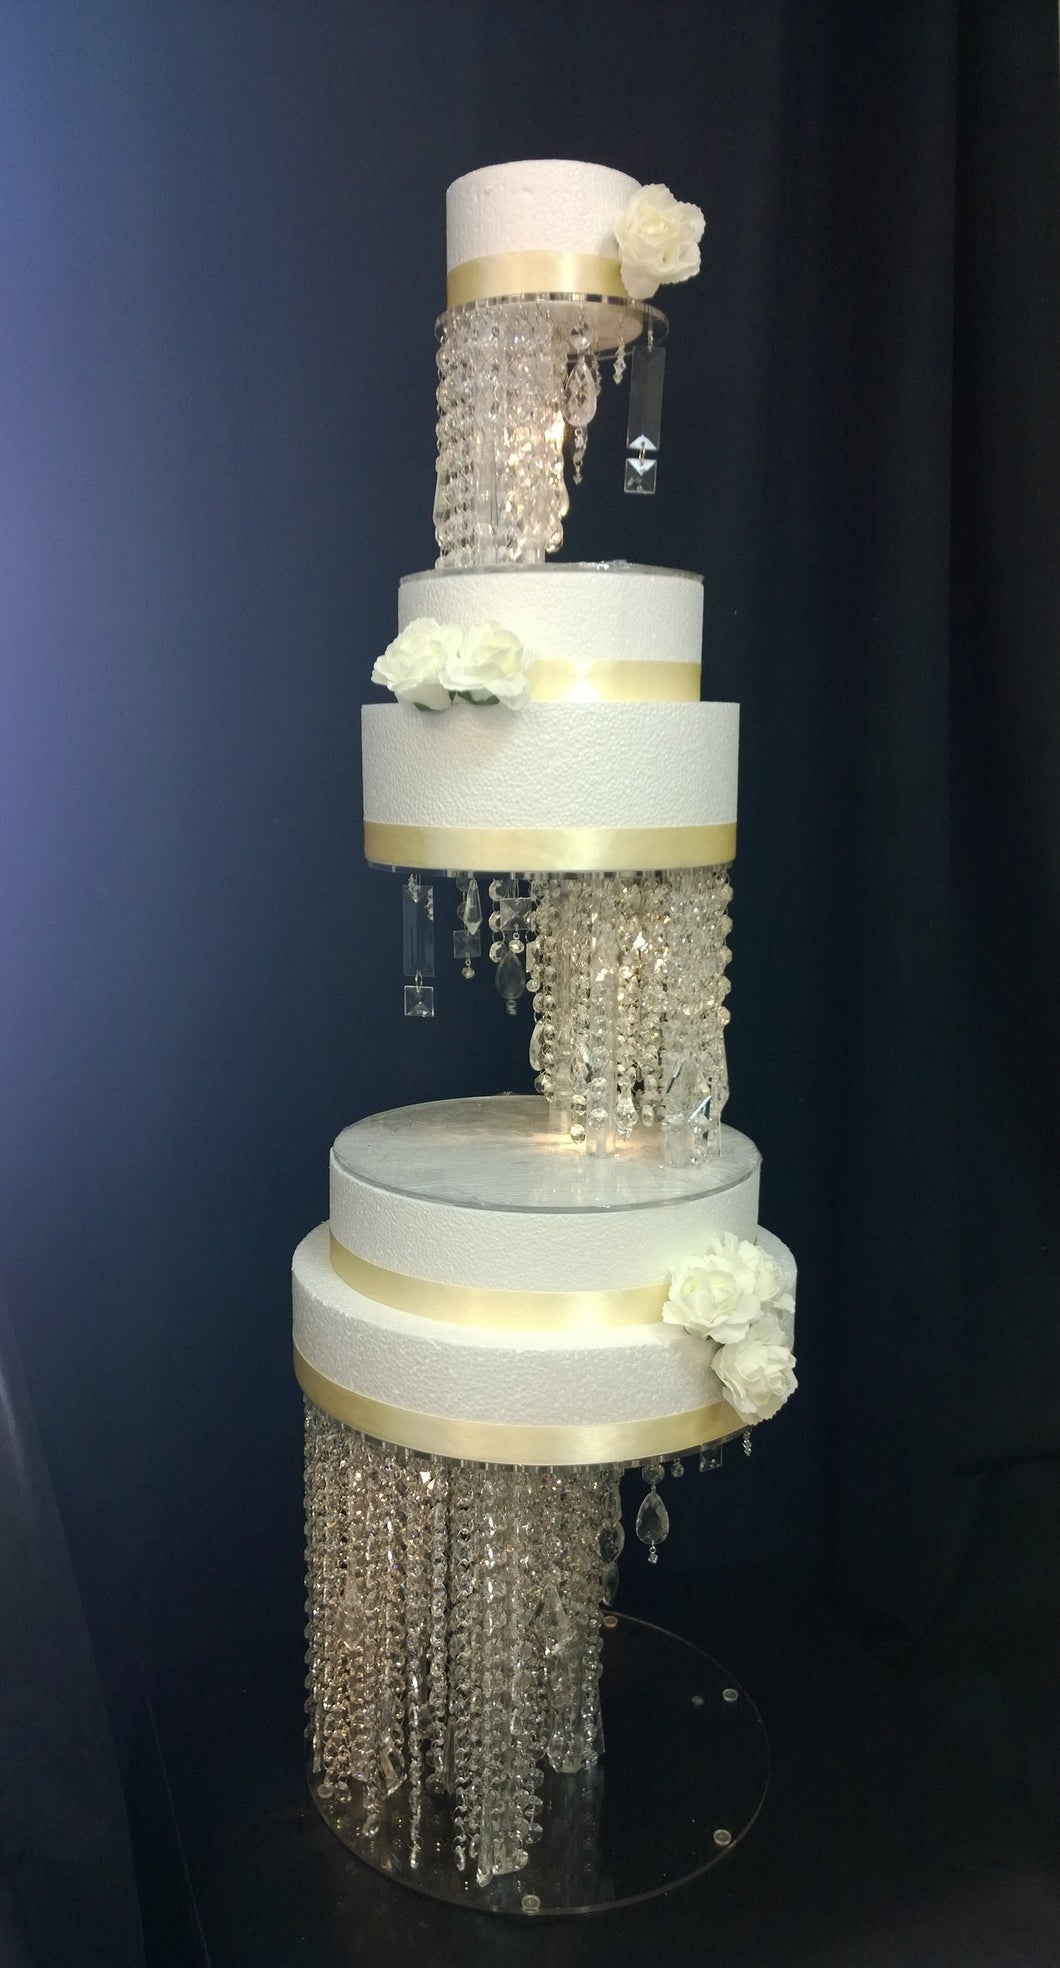 Order for laura -Crystal cake stand + 2 separators chandelier wedding cake with LED Lights,set of 3 pieces  4